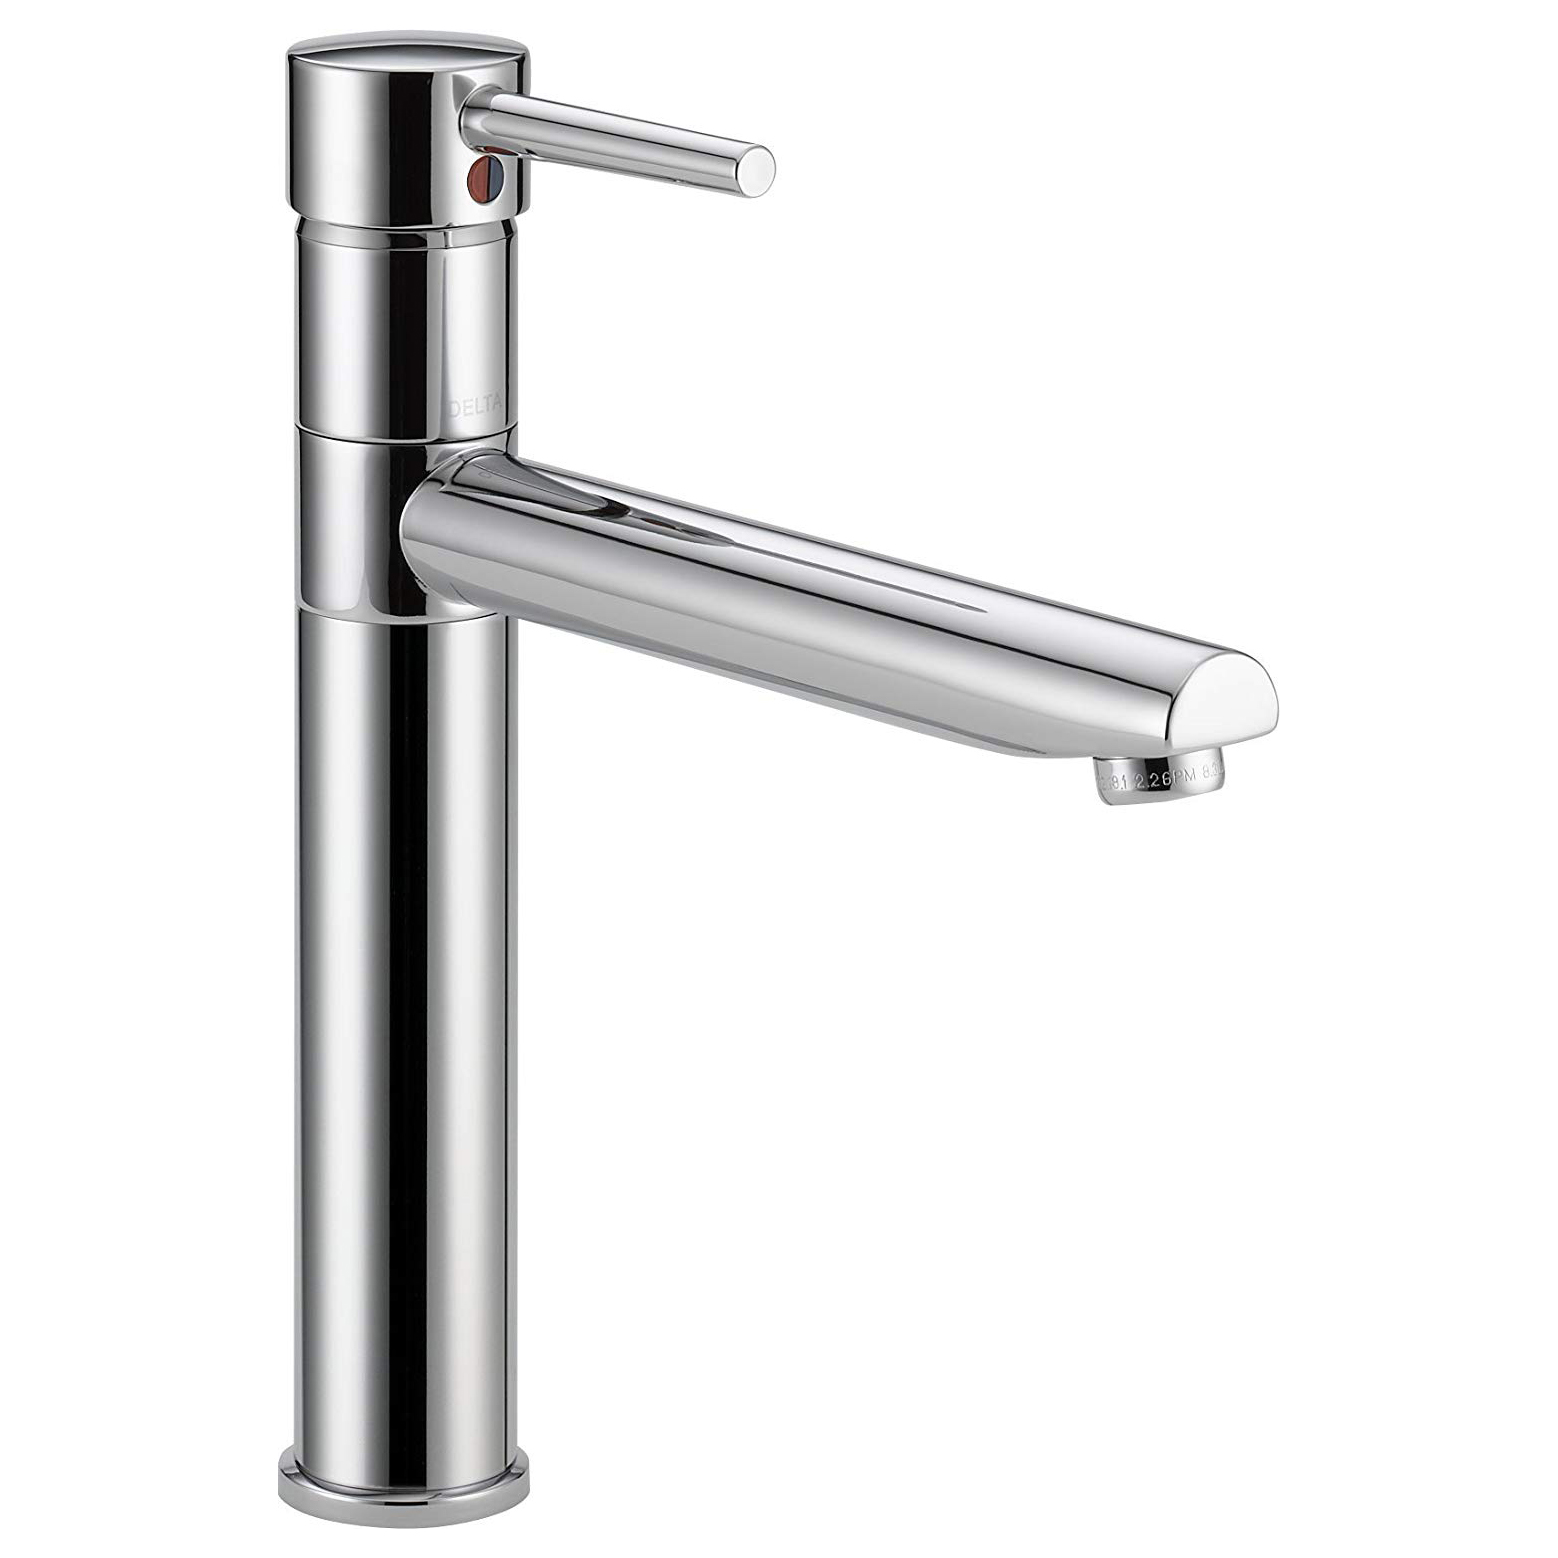 Trinsic Single Hole Kitchen Faucet in Chrome